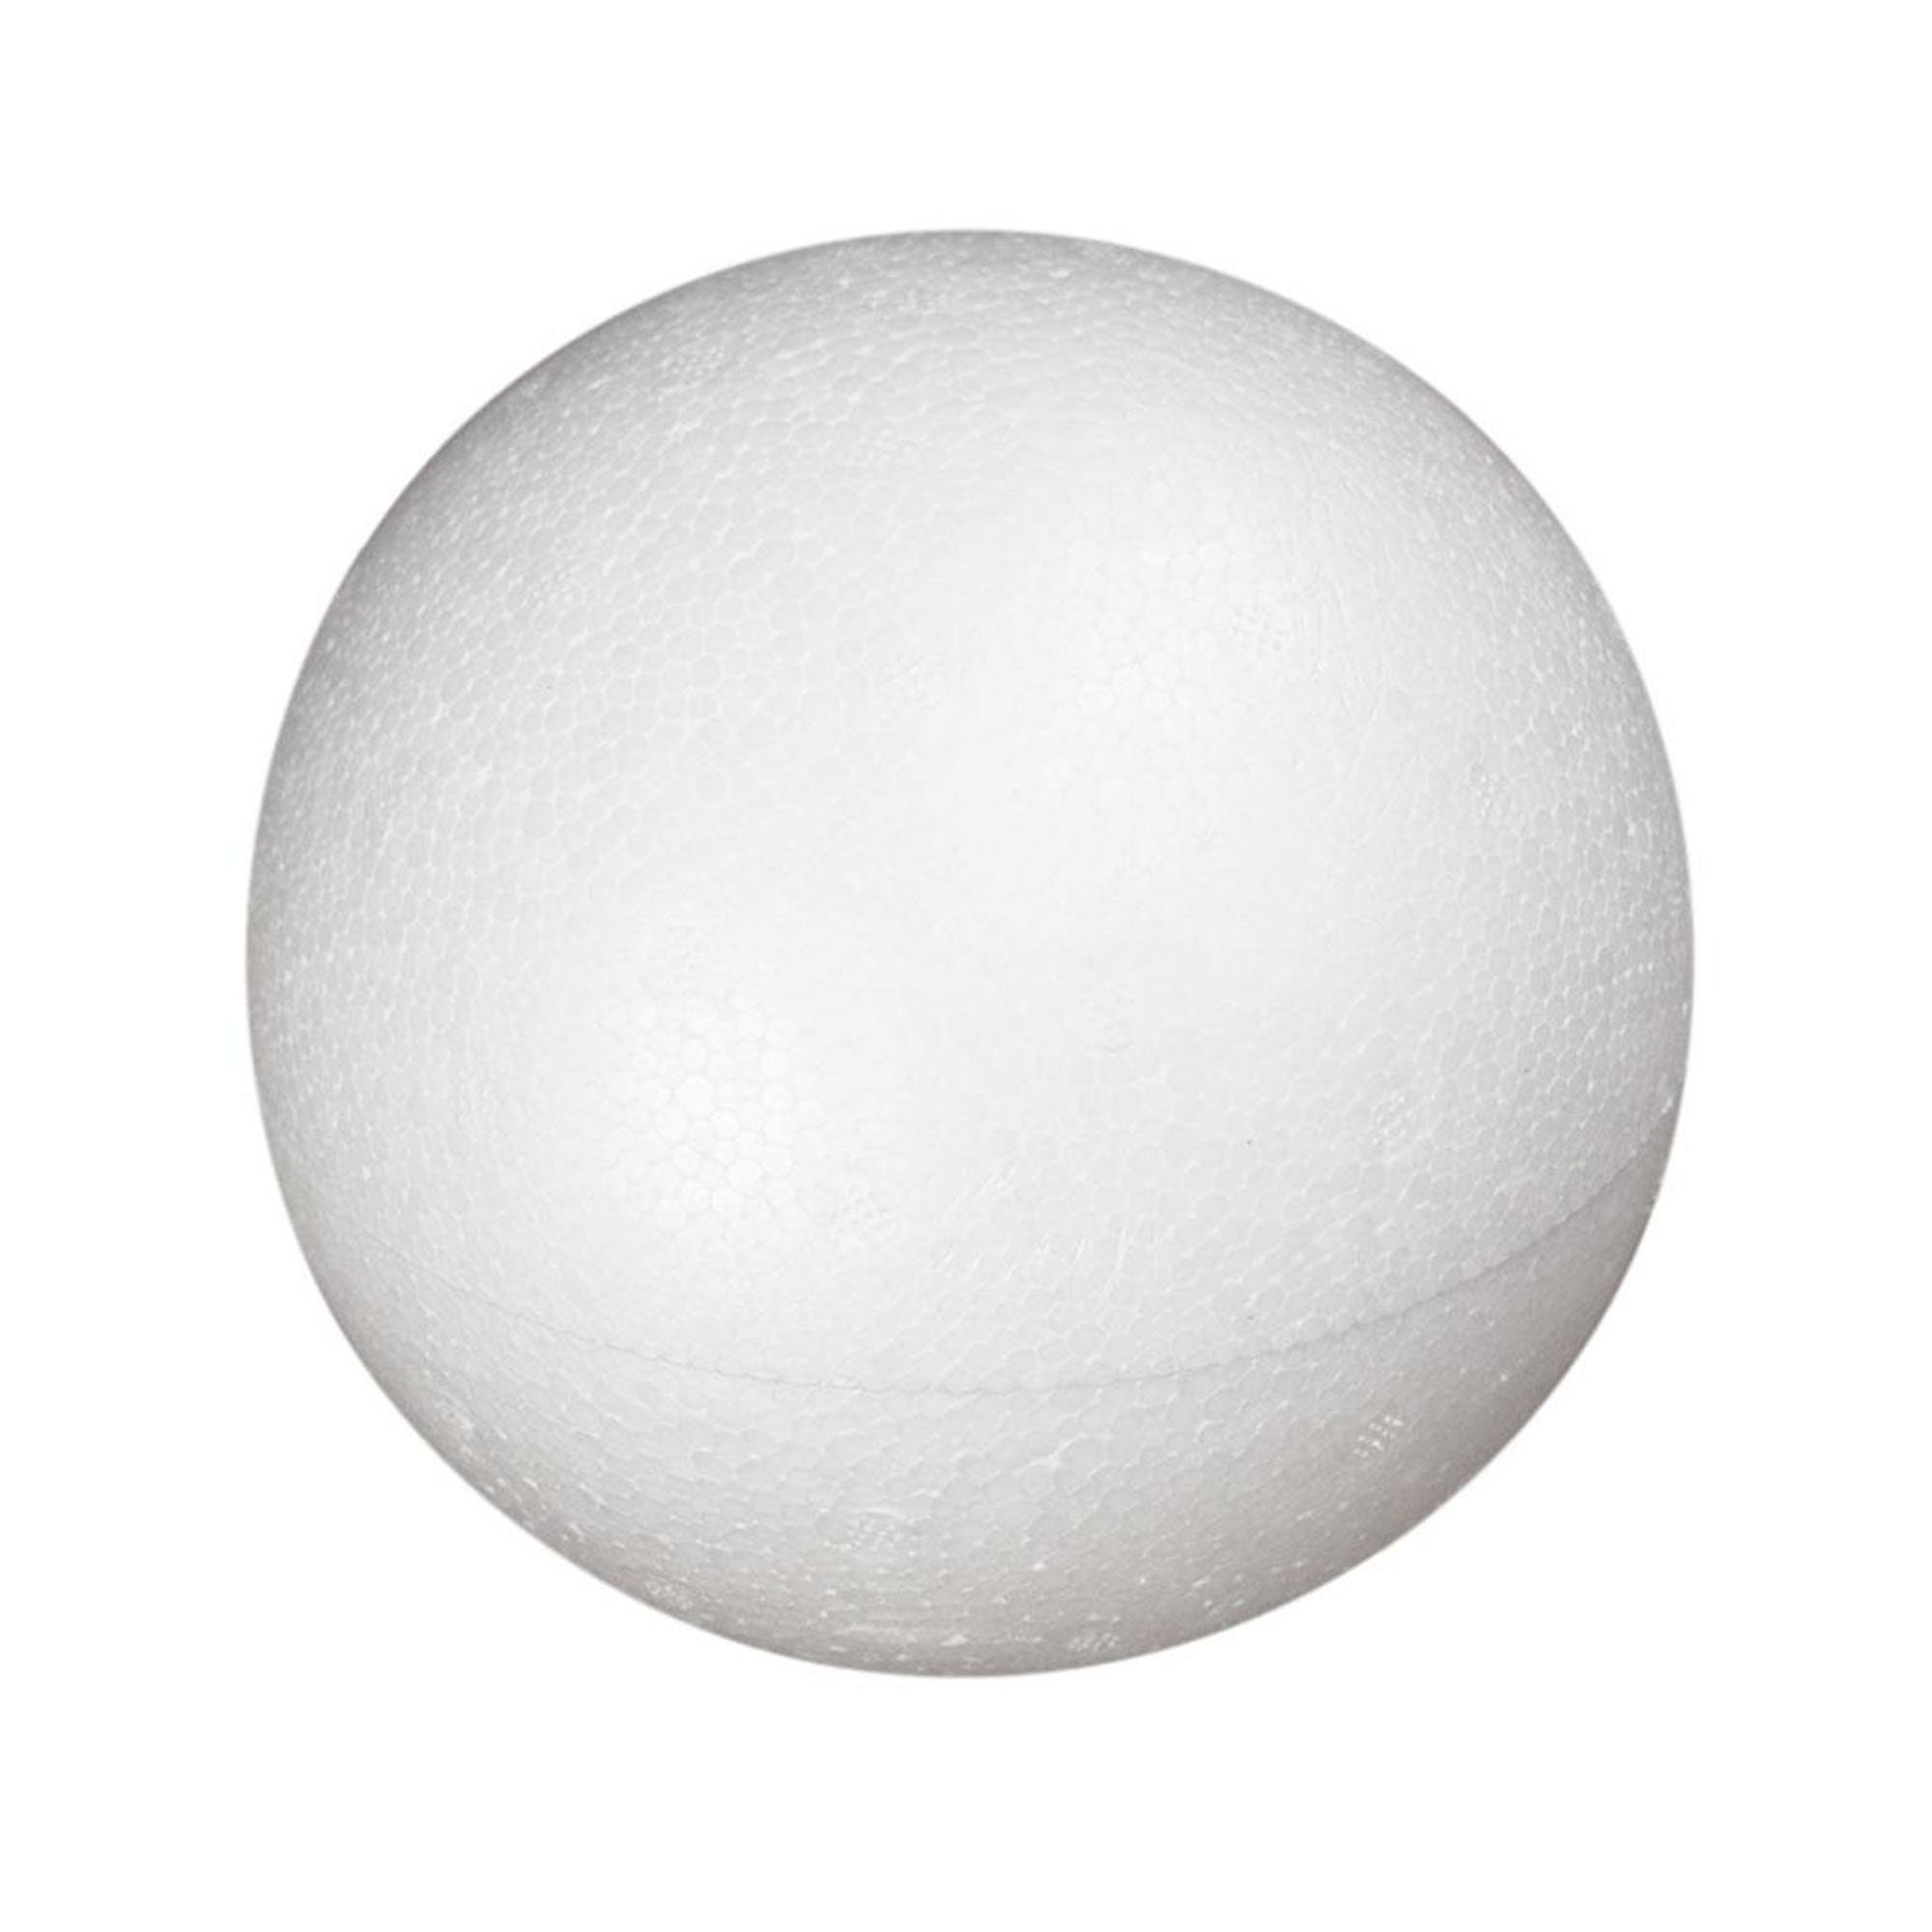 Styrofoam Ball 6'' - The Compleat Sculptor - The Compleat Sculptor